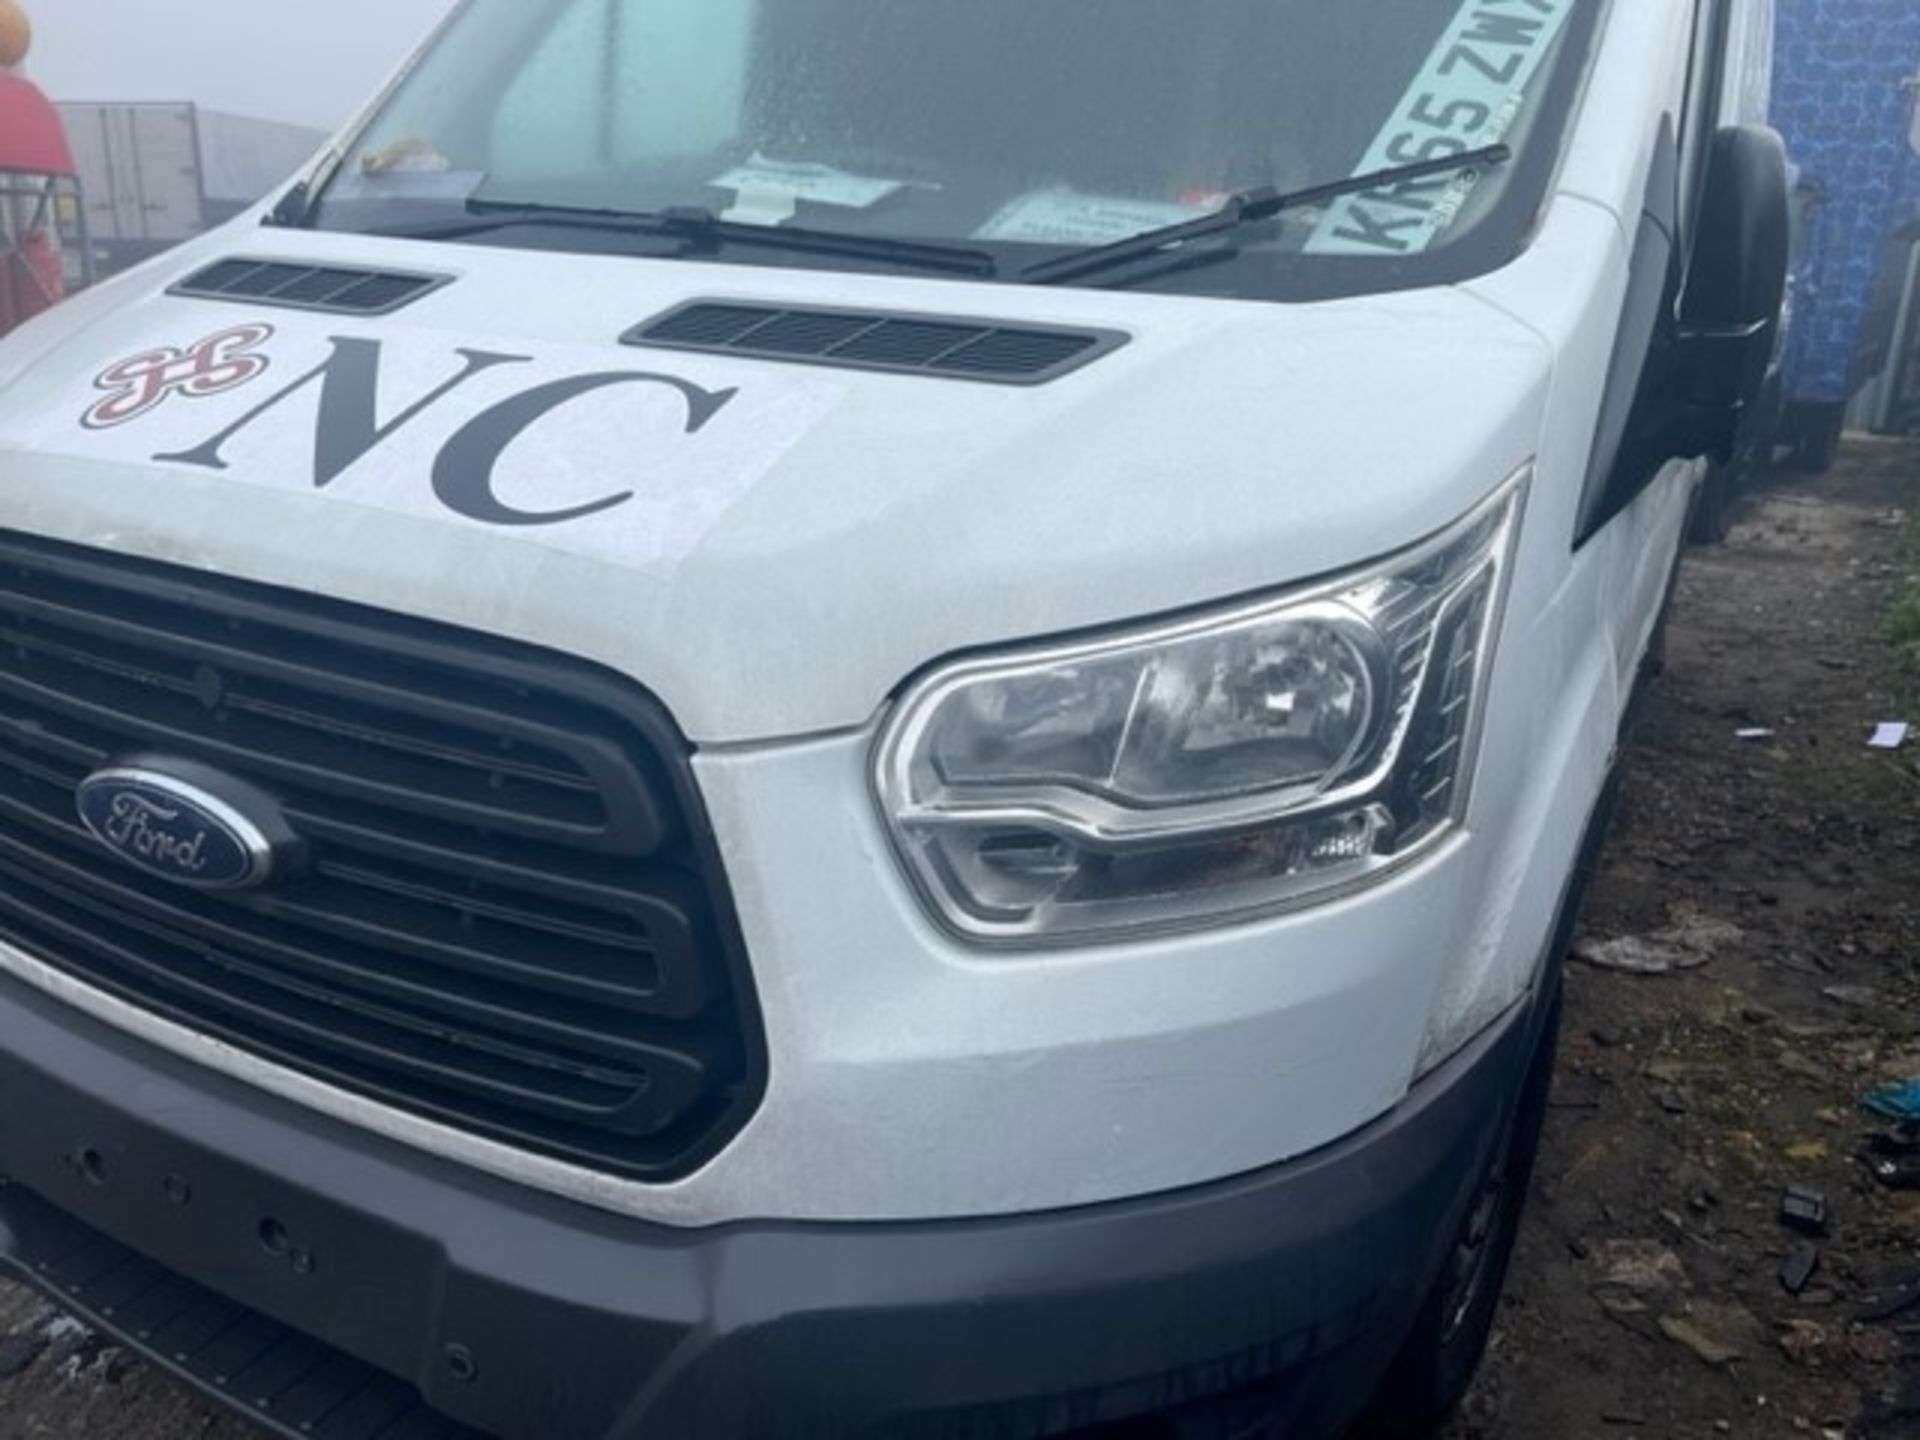 **** PLEASE NOTE THIS VEHICLE IS SITUATED IN CROYDON**** WHITE FORD TRANSIT 310 DIESEL PANEL VAN